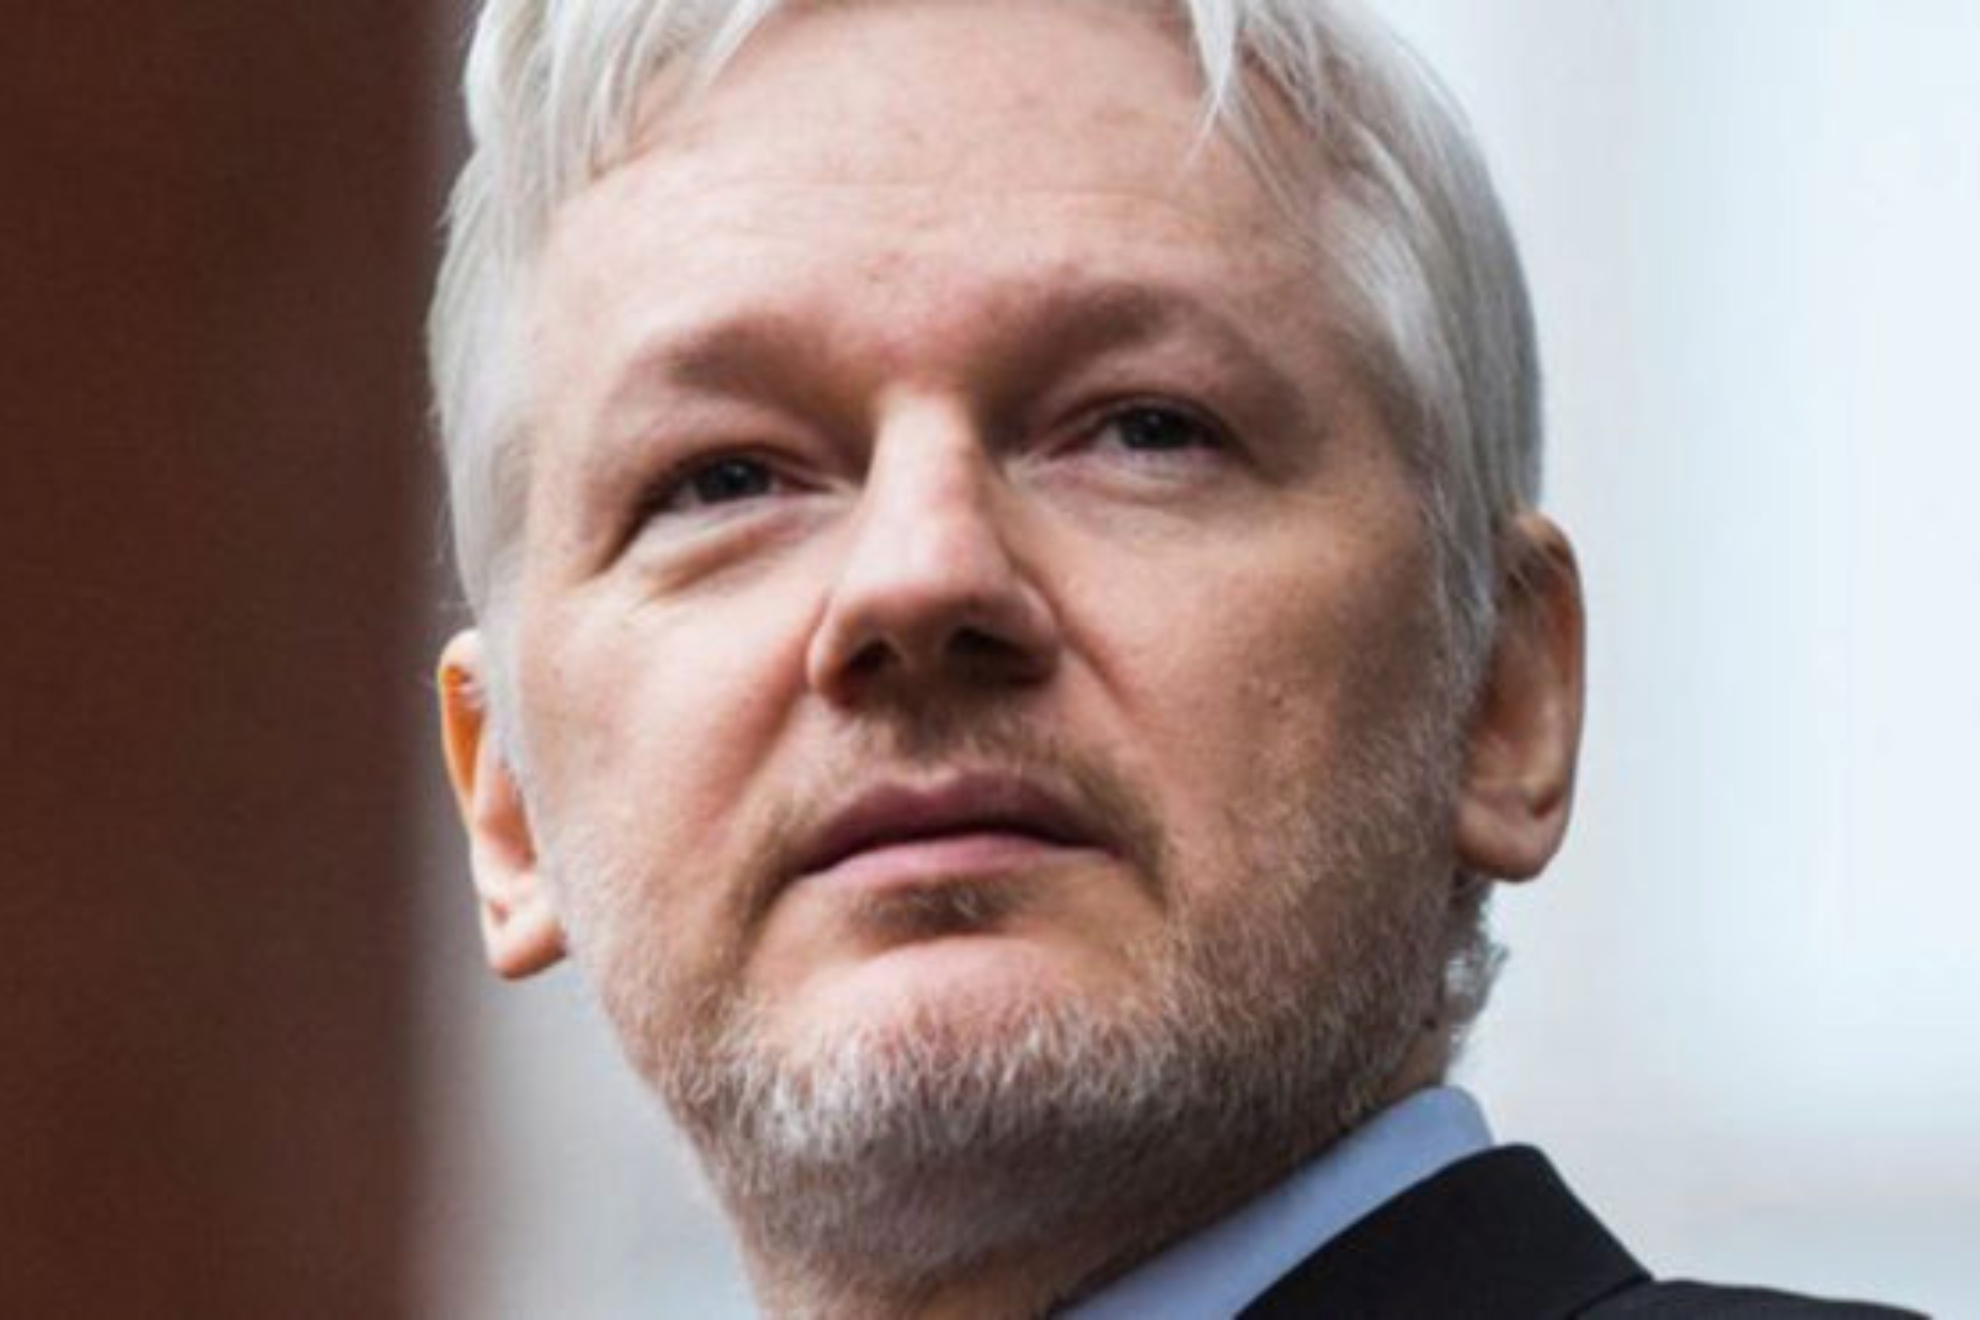 The British Courts allow Julian Assange to appeal against his extradition to the USA